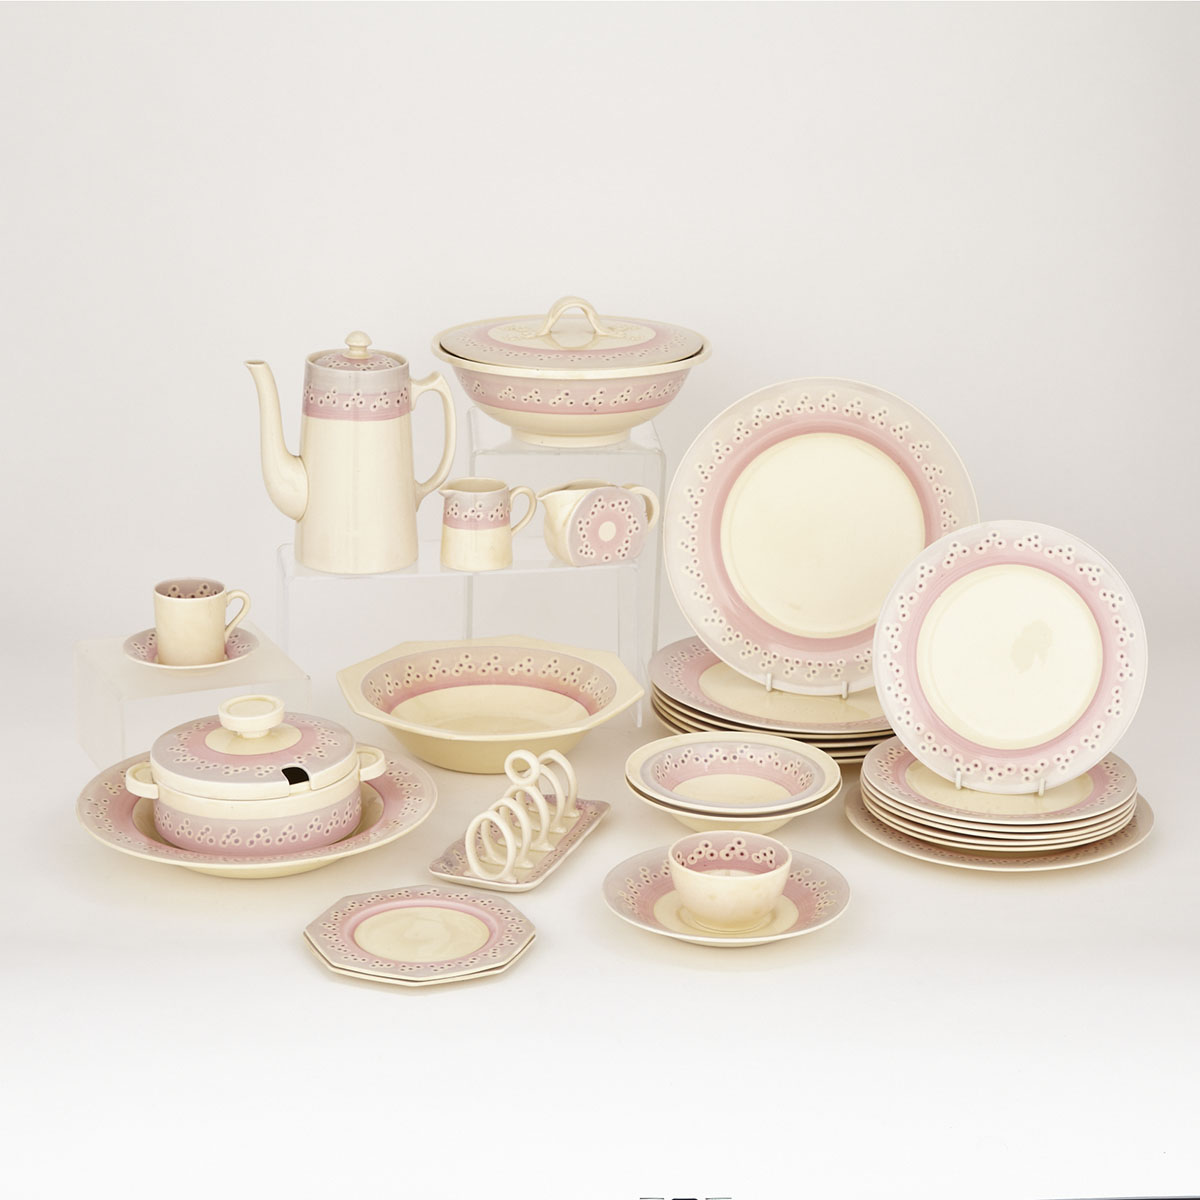 Clarice Cliff ‘Honiton’ (Pink) Pattern Part Service, c.1935